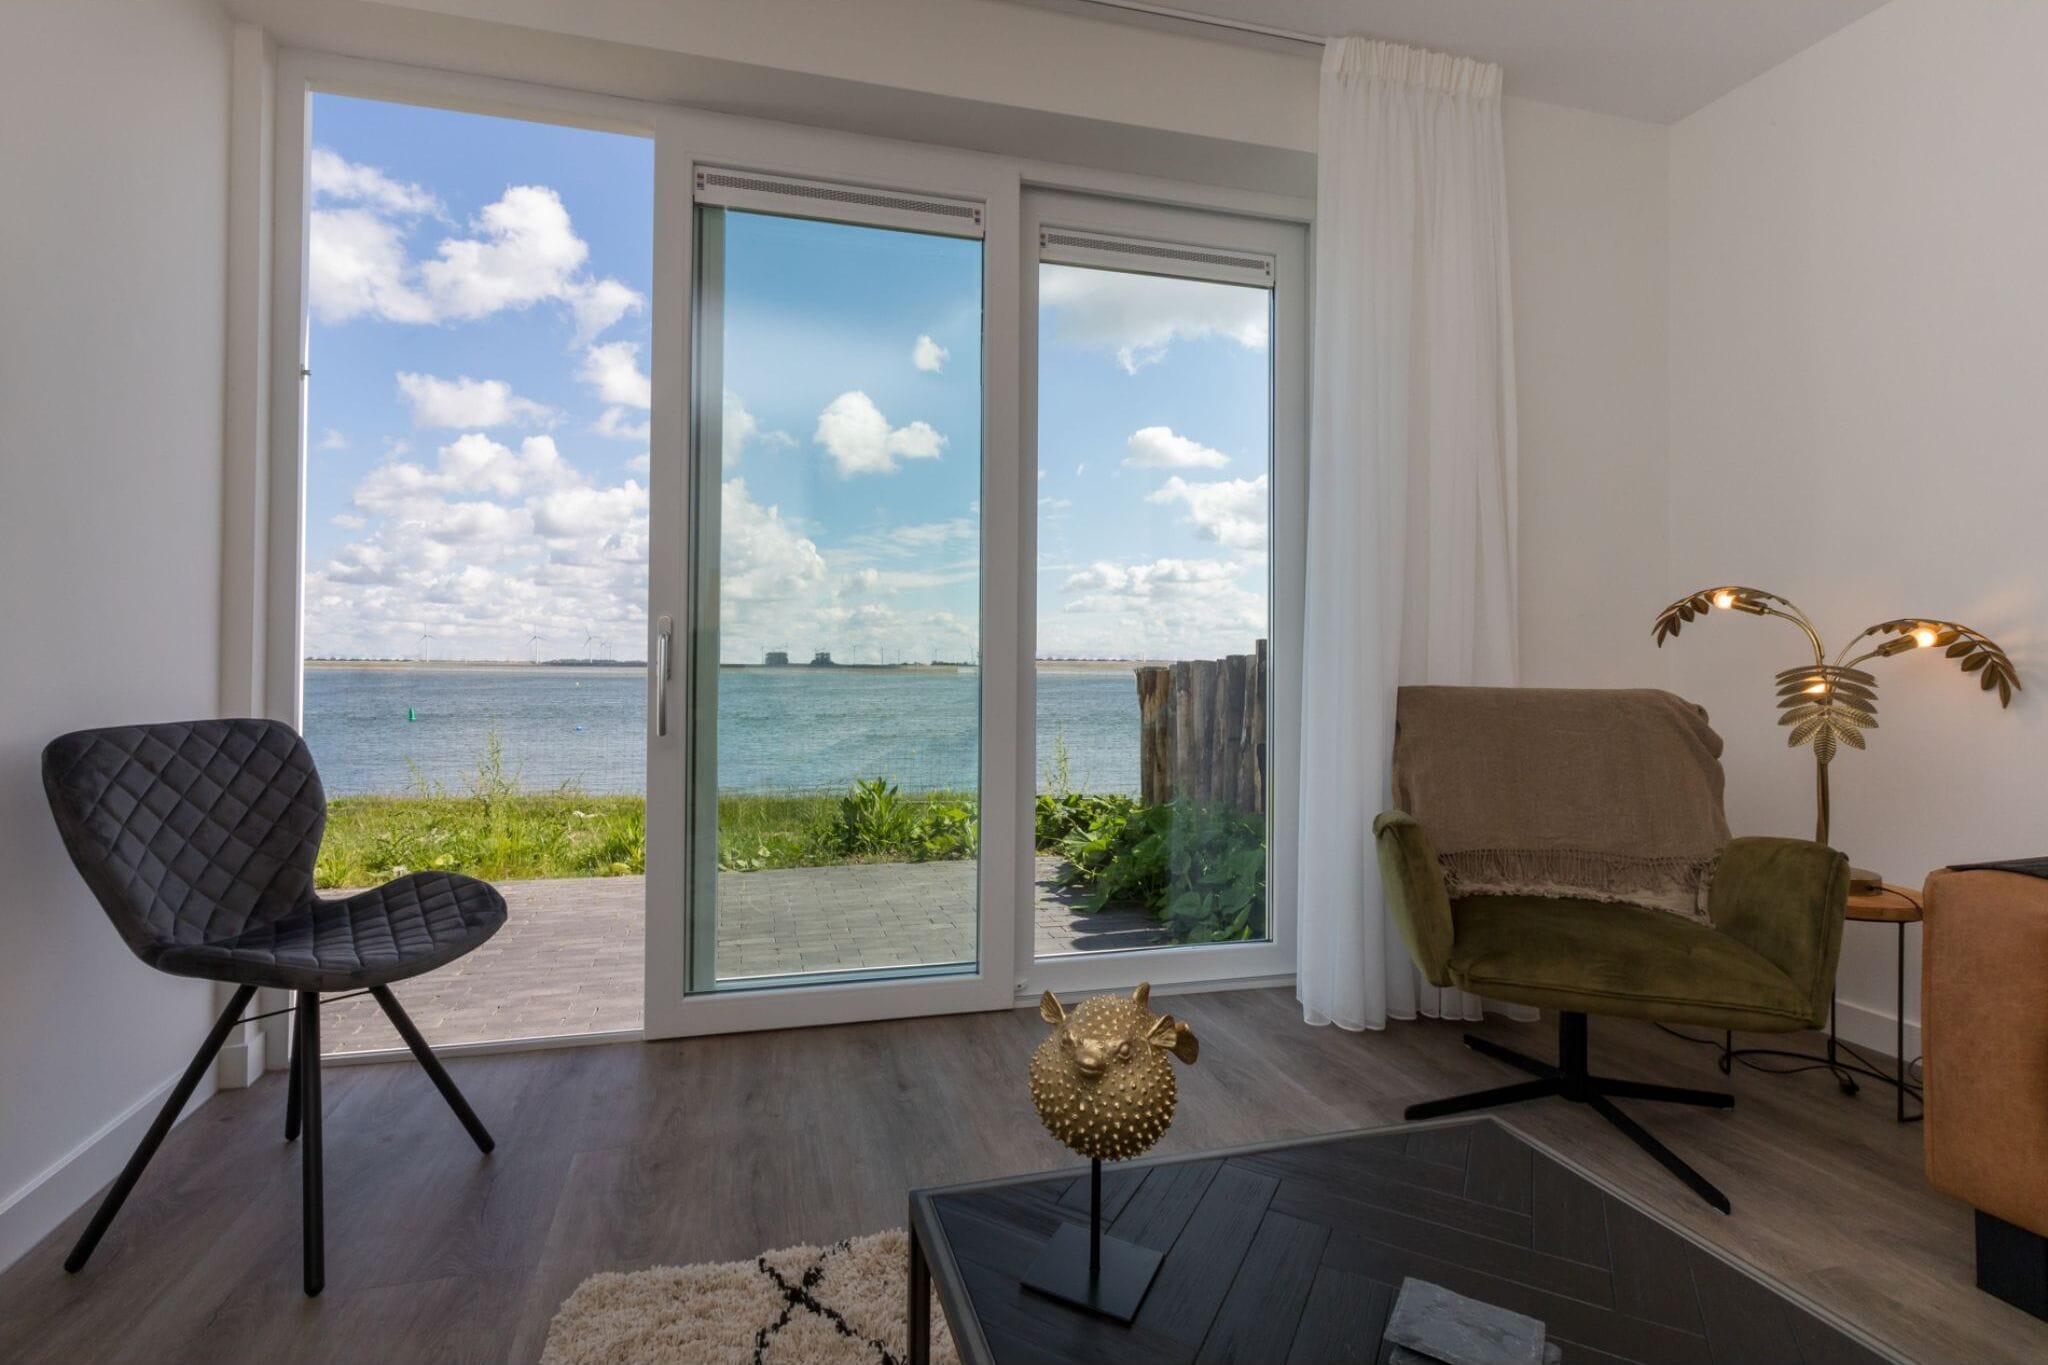 Unique apartment, located on the Oosterschelde and marina of Sint Annaland